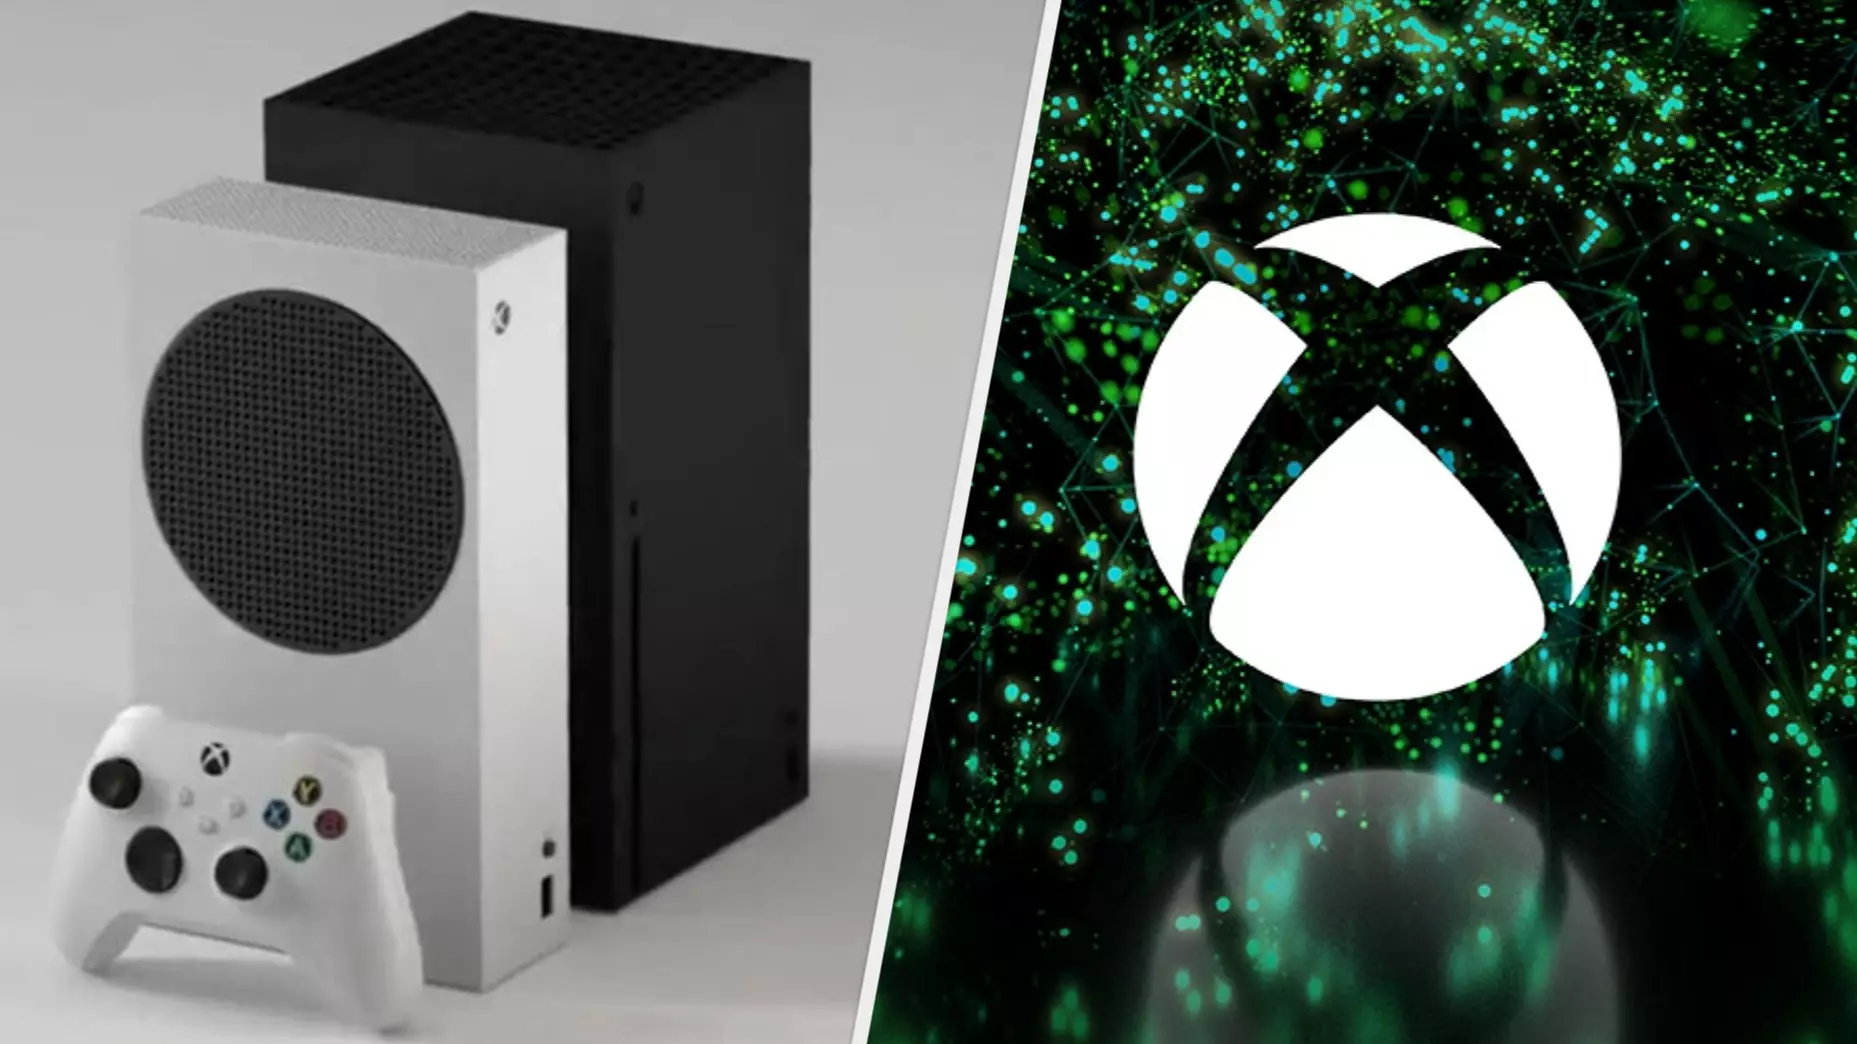 The Xbox Series S Design Has Already Spawned Some Savage Memes